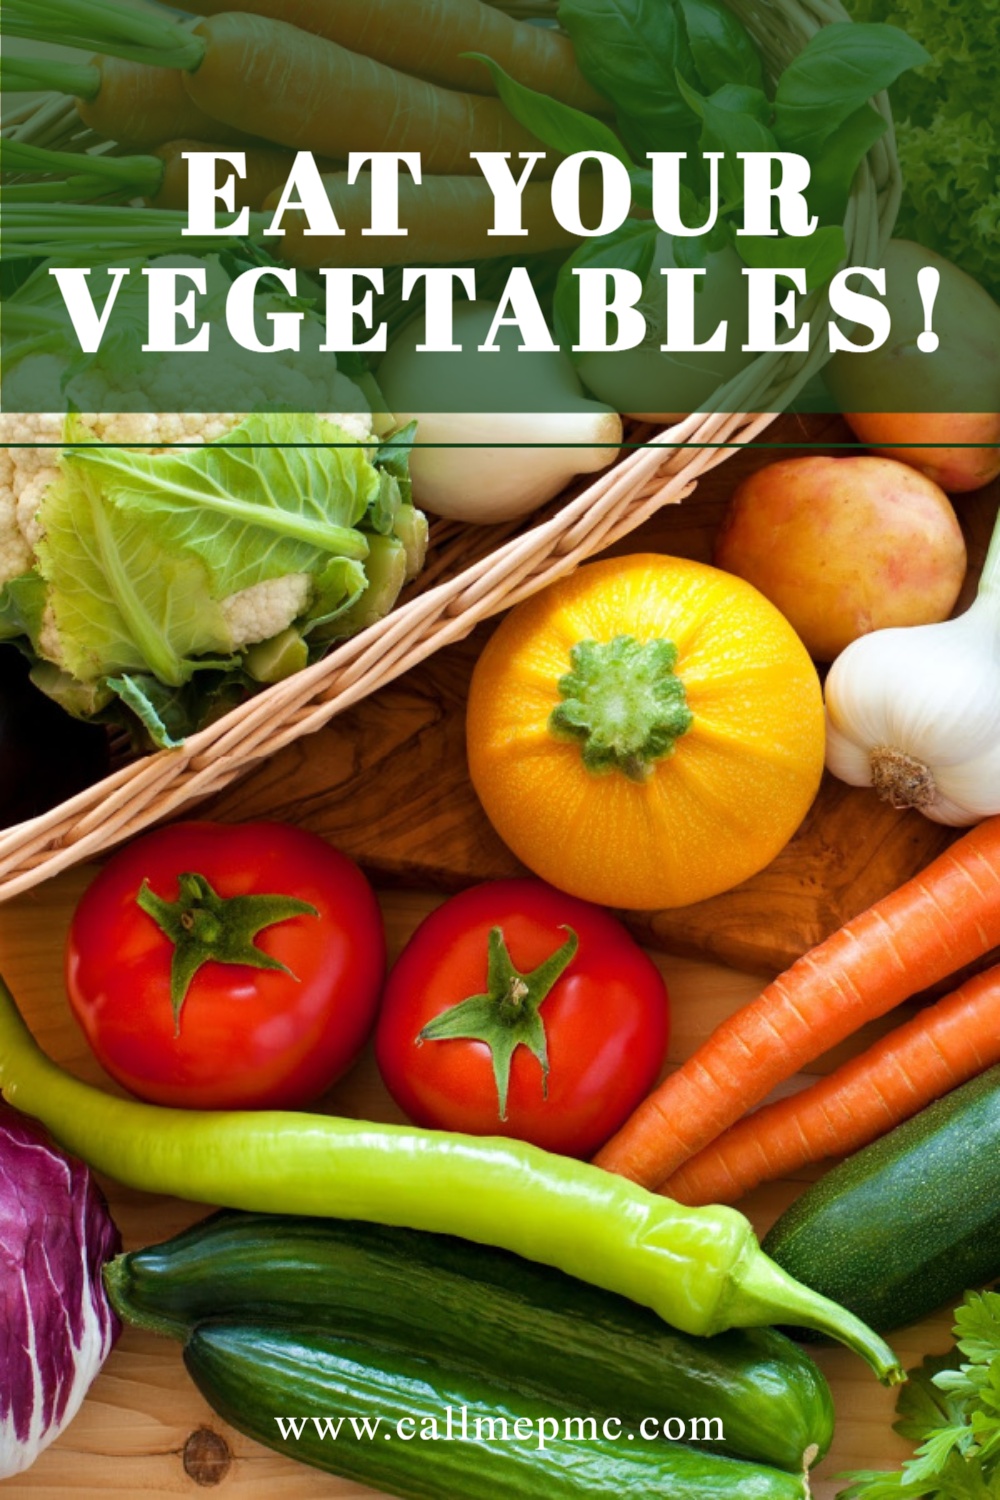 Real food is the best source of nutrients for fueling our bodies and our healing and vegetables are powerhouses of nutrients! #vegetables #vegetablerecipes #recipes #vegetableroundup #callmepmc